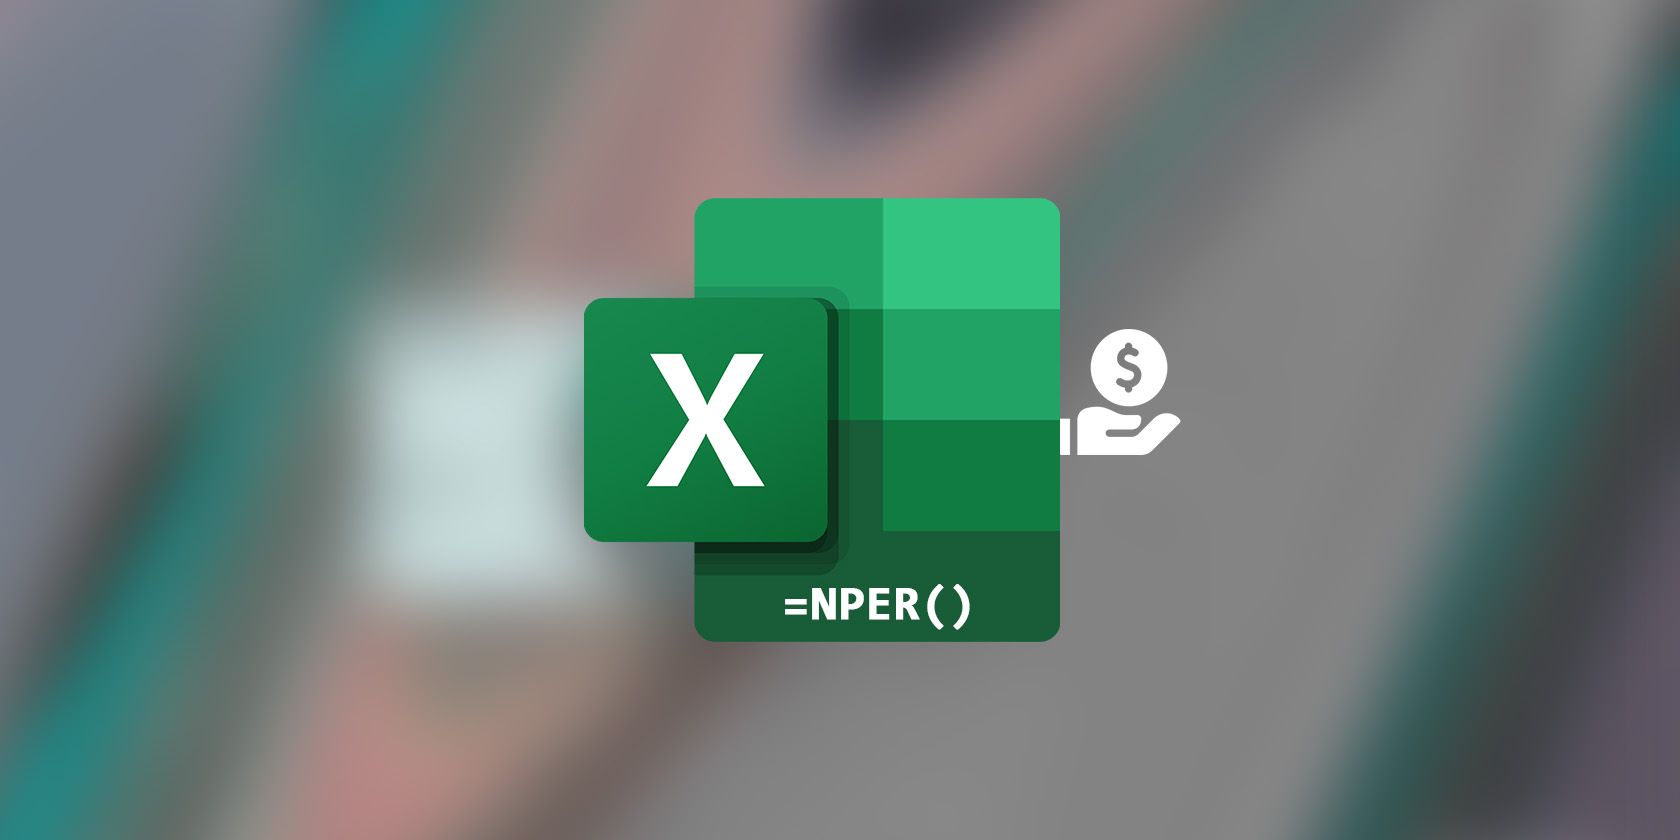 Excel logo with NPER function